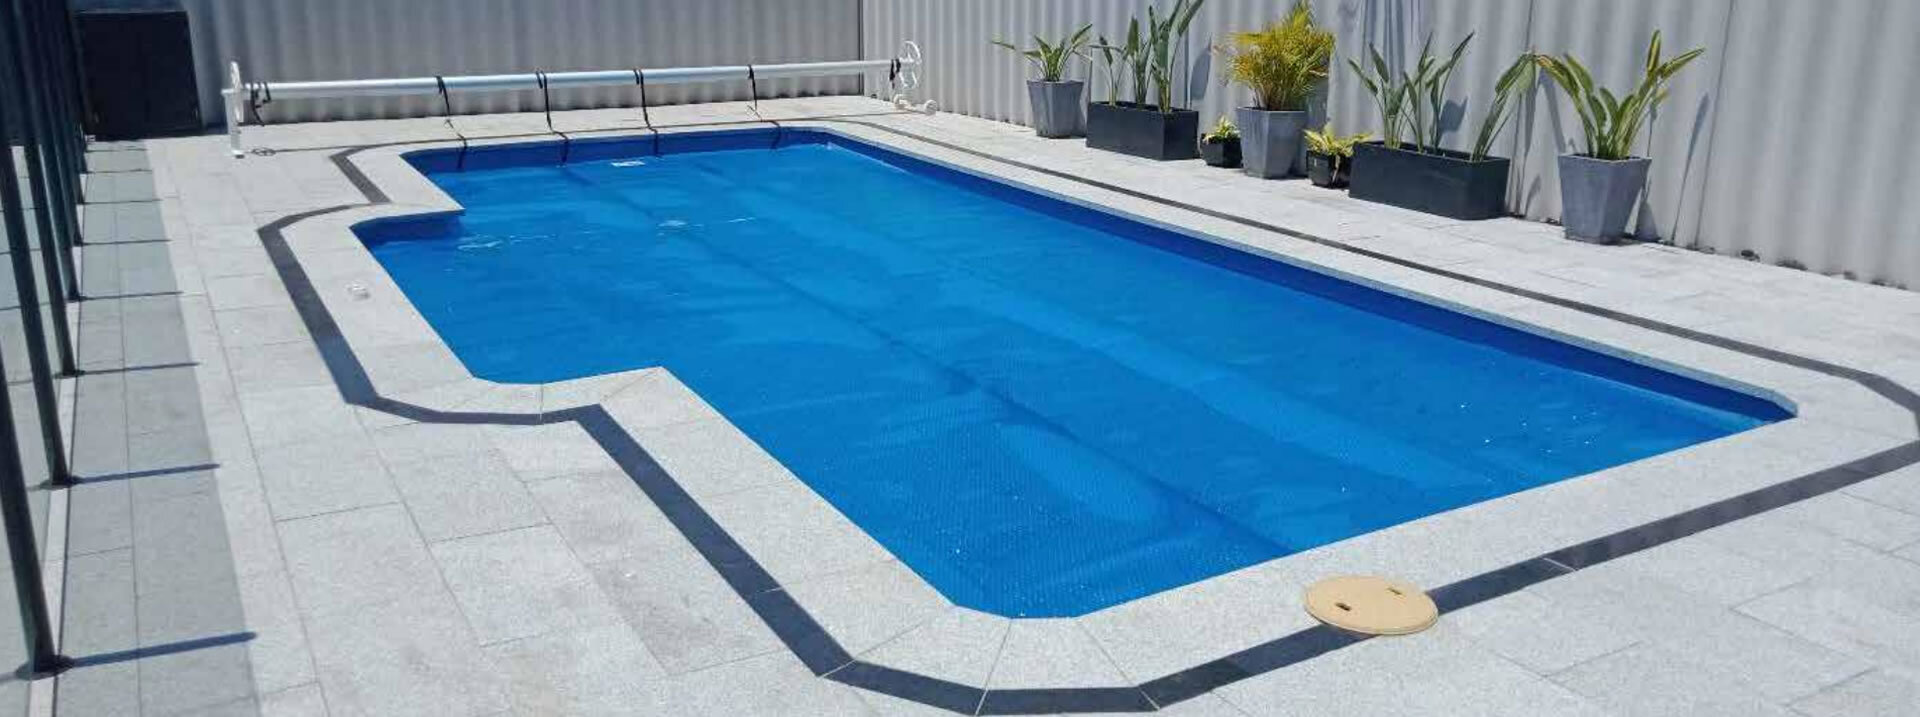 Swimming Pool Covers - High quality cover material by Plastipack